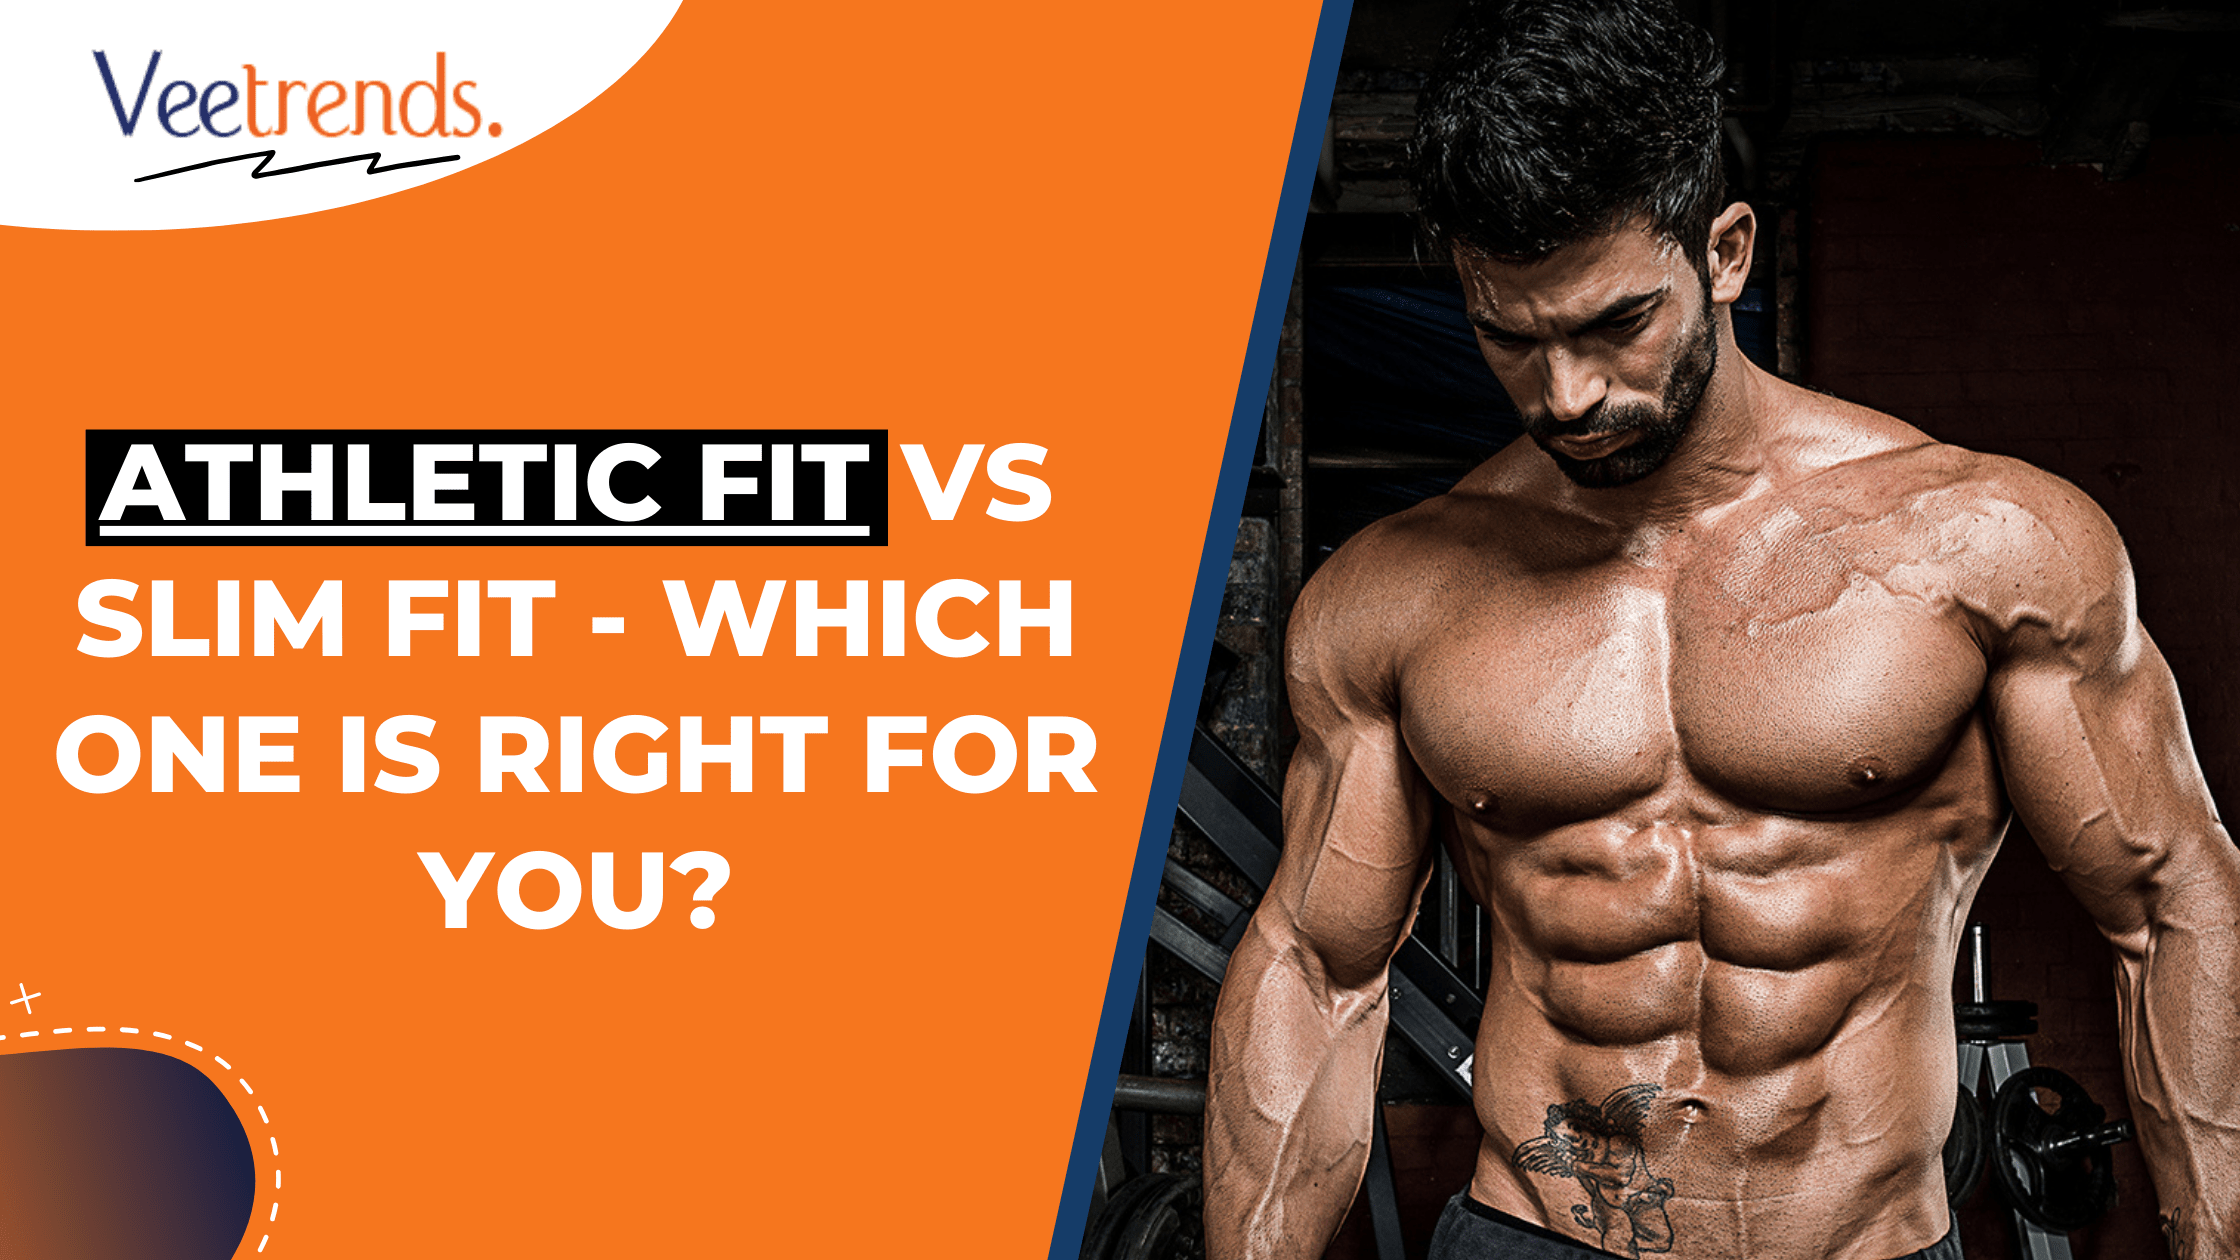 Athletic Fit Vs Slim Fit - Which One is Right for You?